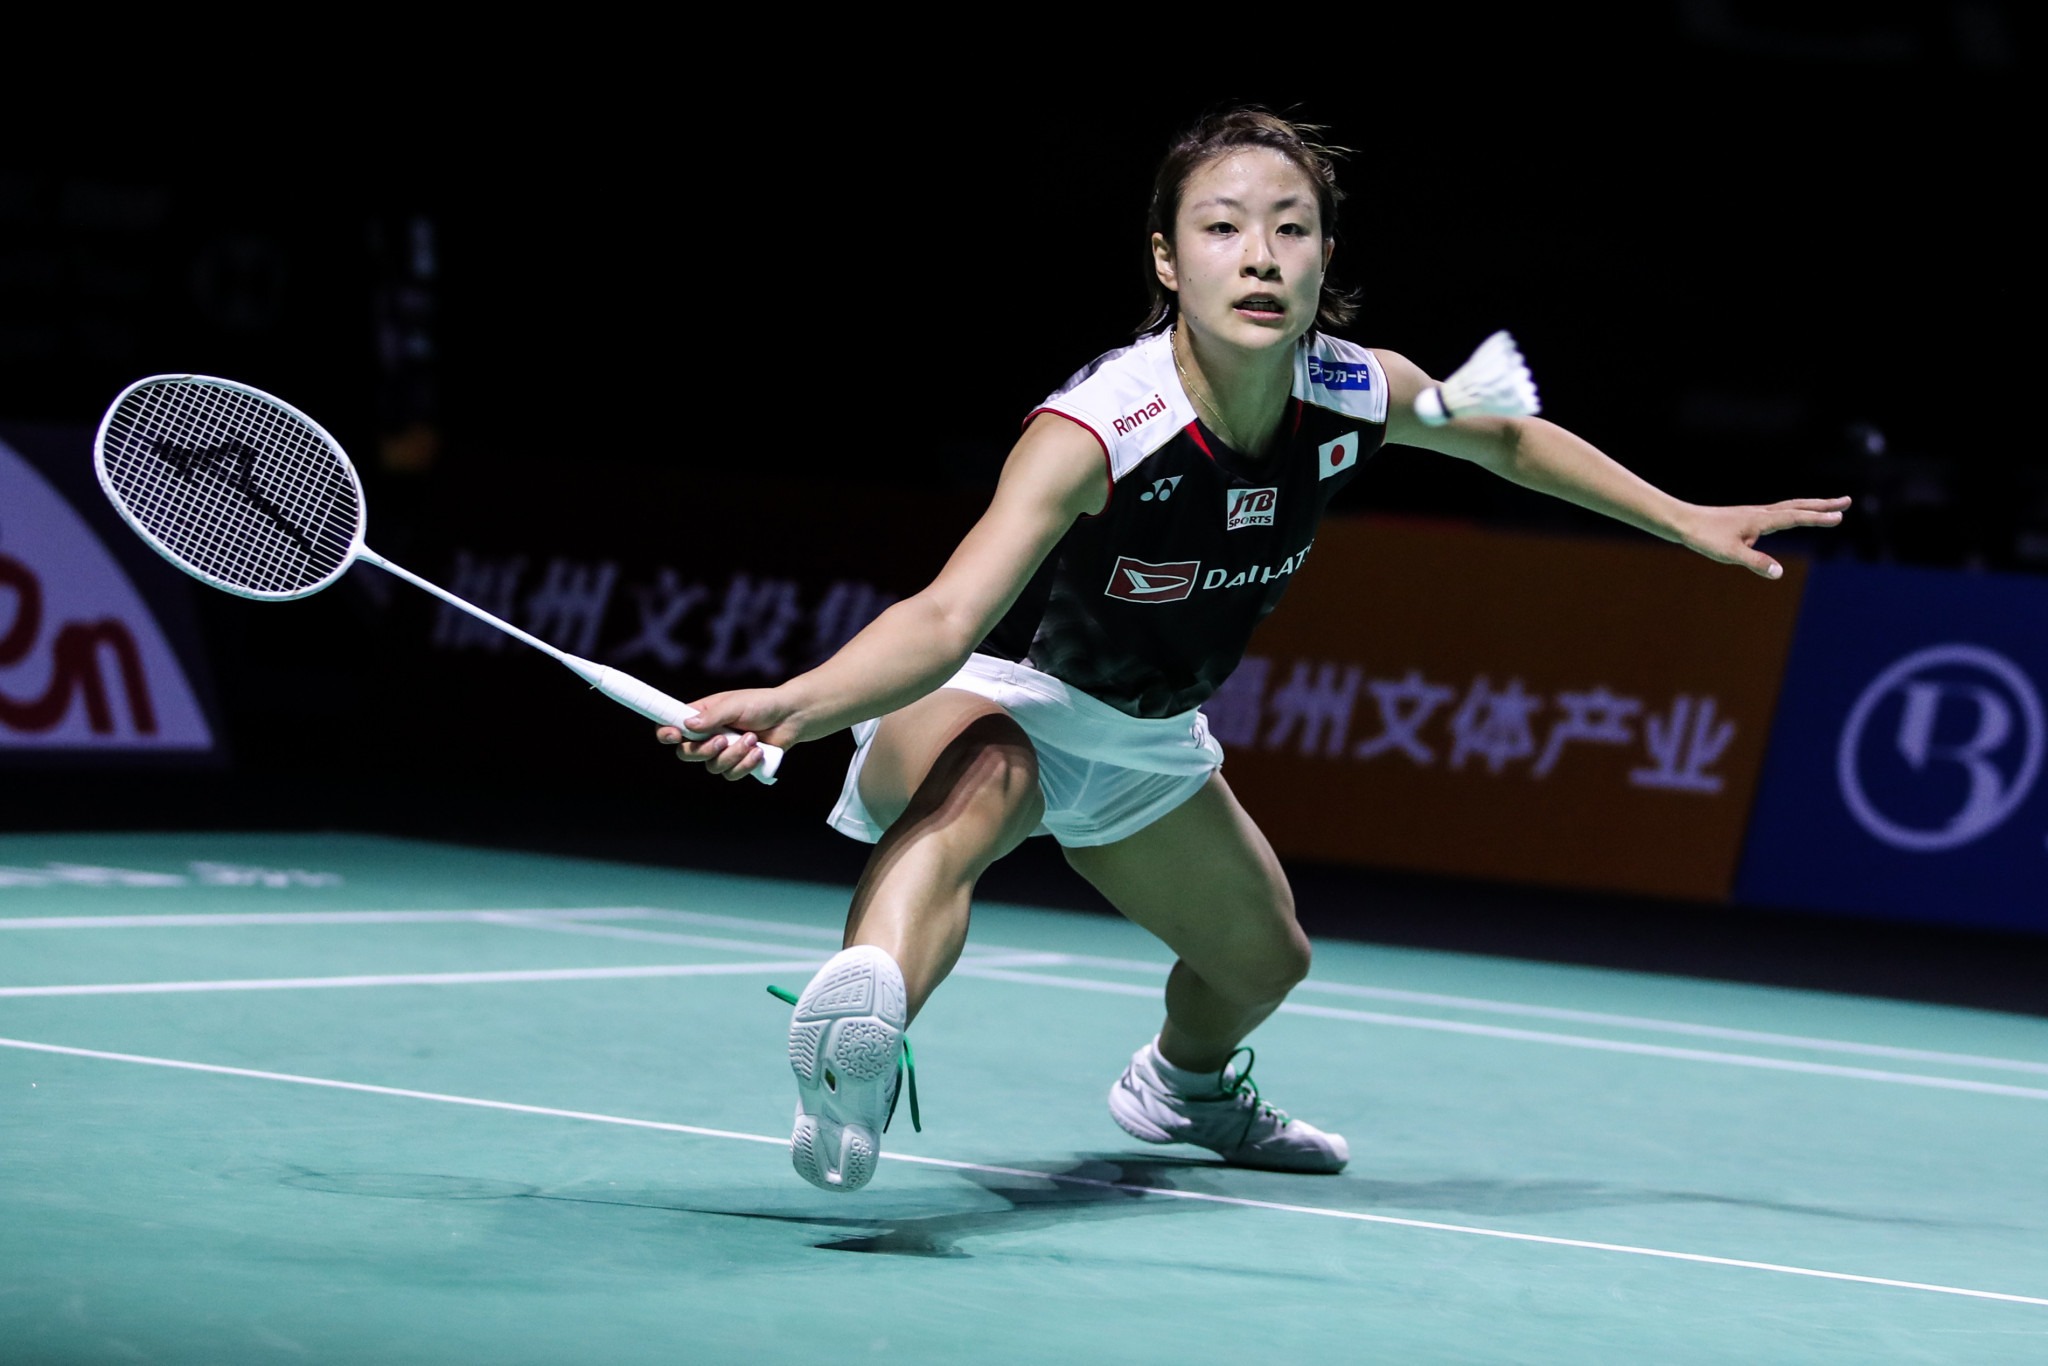 Nozomi Okuhara will contest the women's singles final ©Getty Images